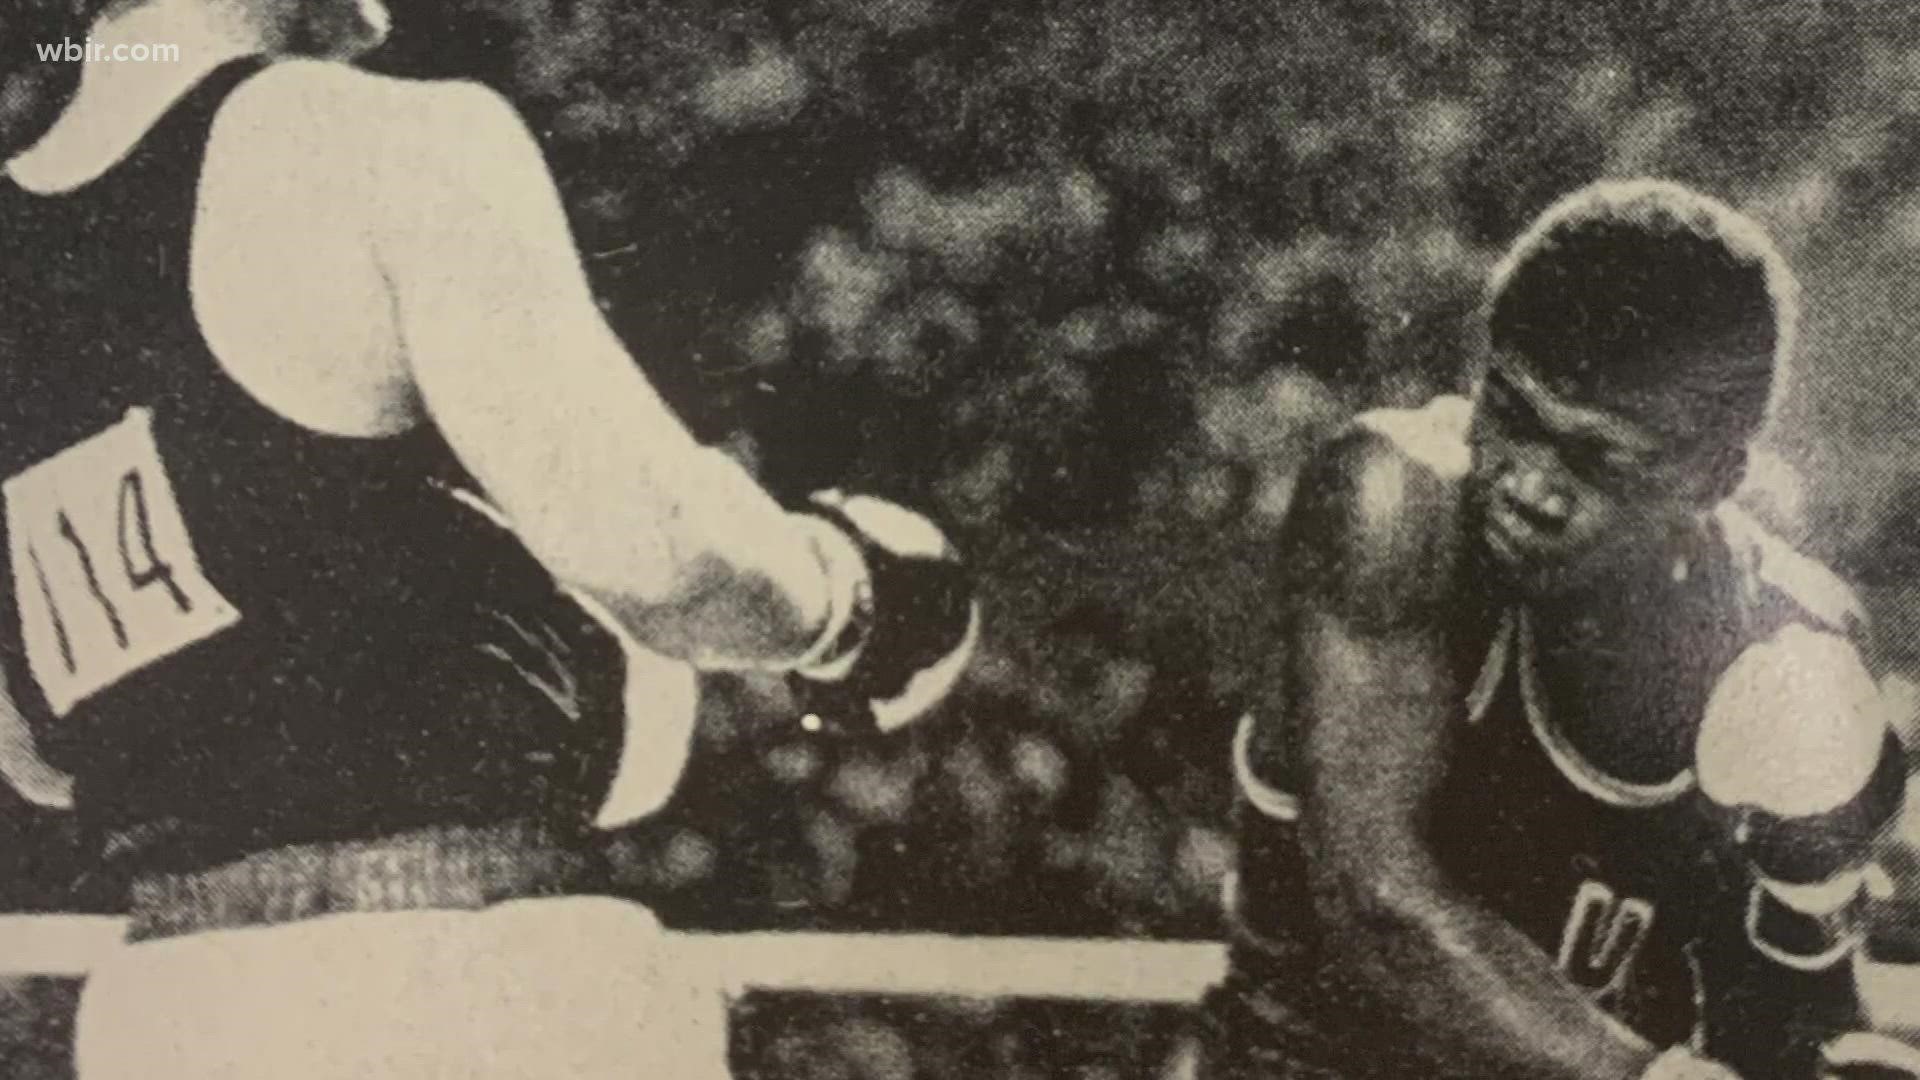 The 50 greatest one-punch knockouts in boxing history